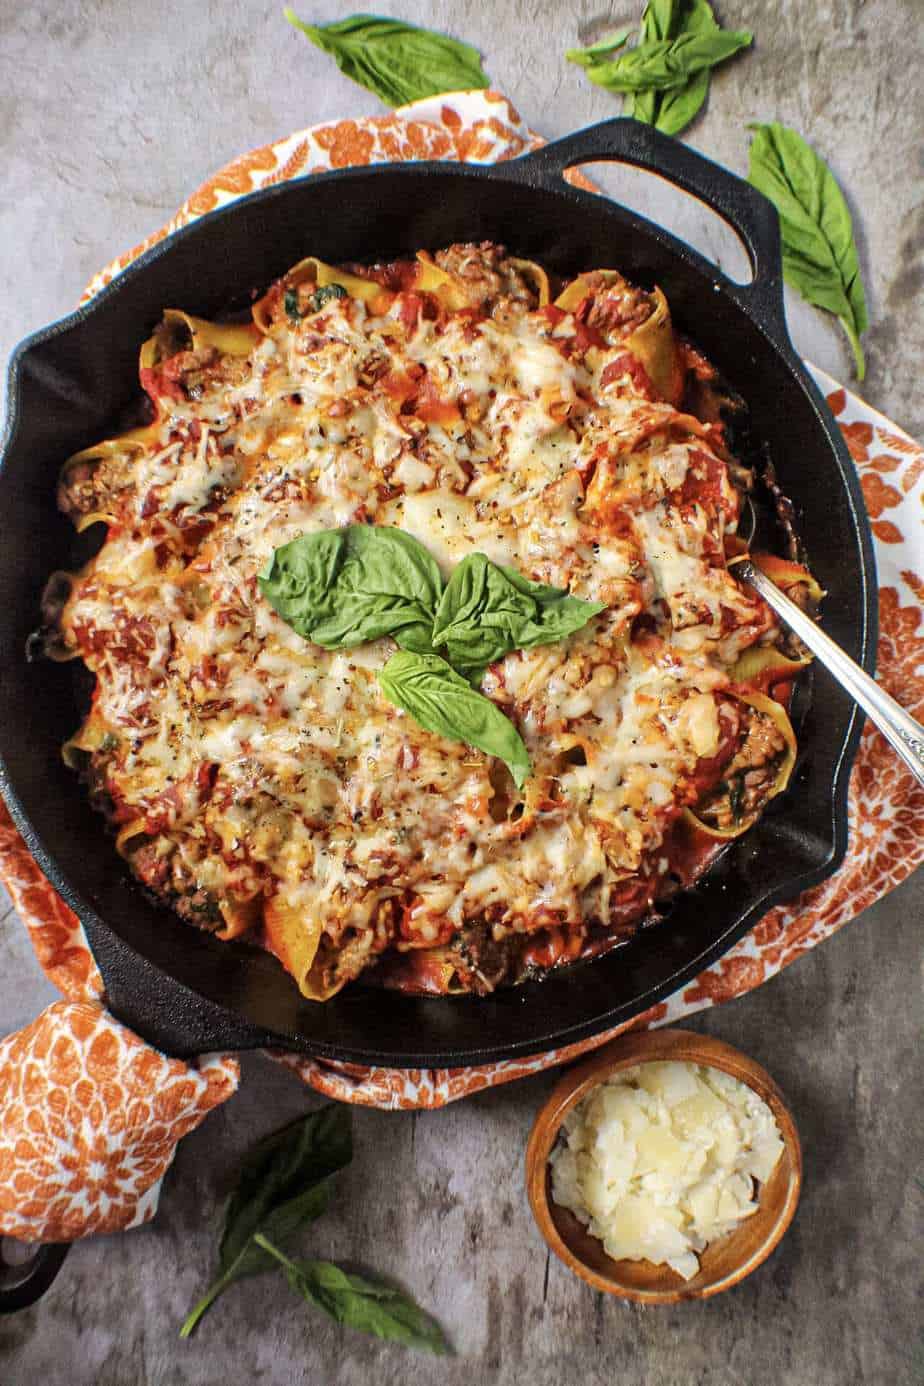 jumbo pasta shells stuffed with ground meat and tomatoes served in cast iron skillet and topped with cheese and fresh basil